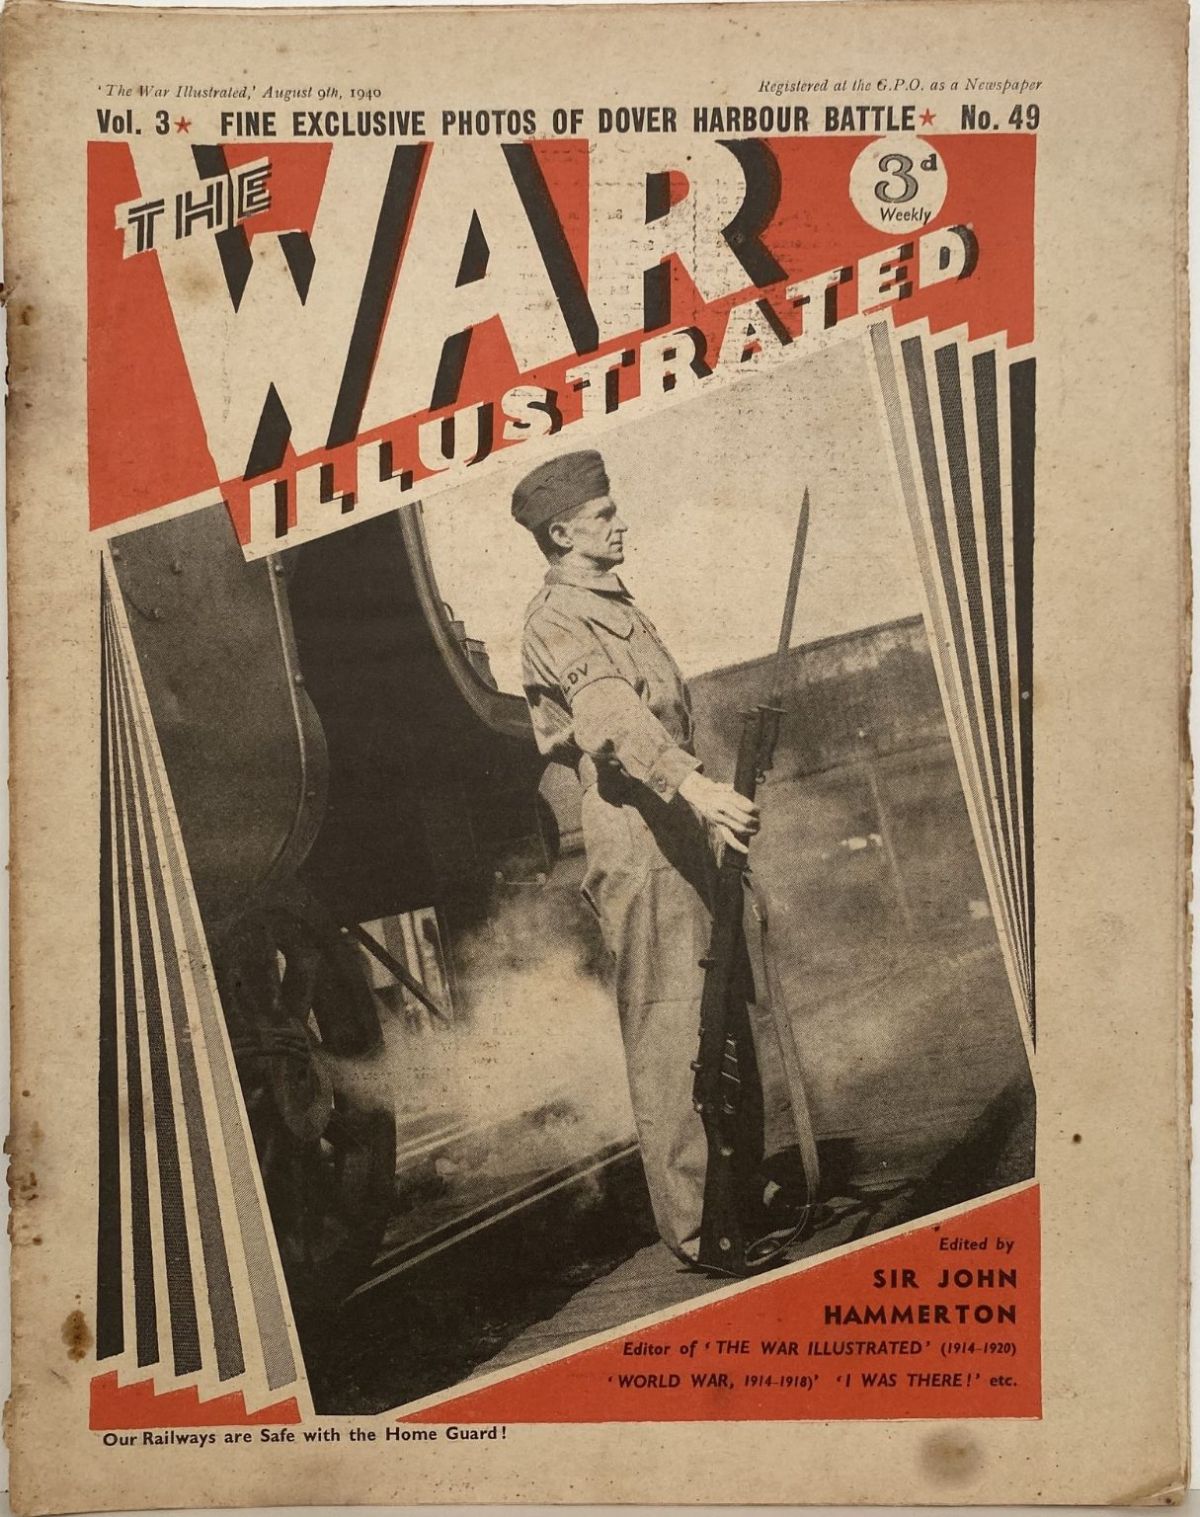 THE WAR ILLUSTRATED - Vol 3, No 49, 9th Aug 1940